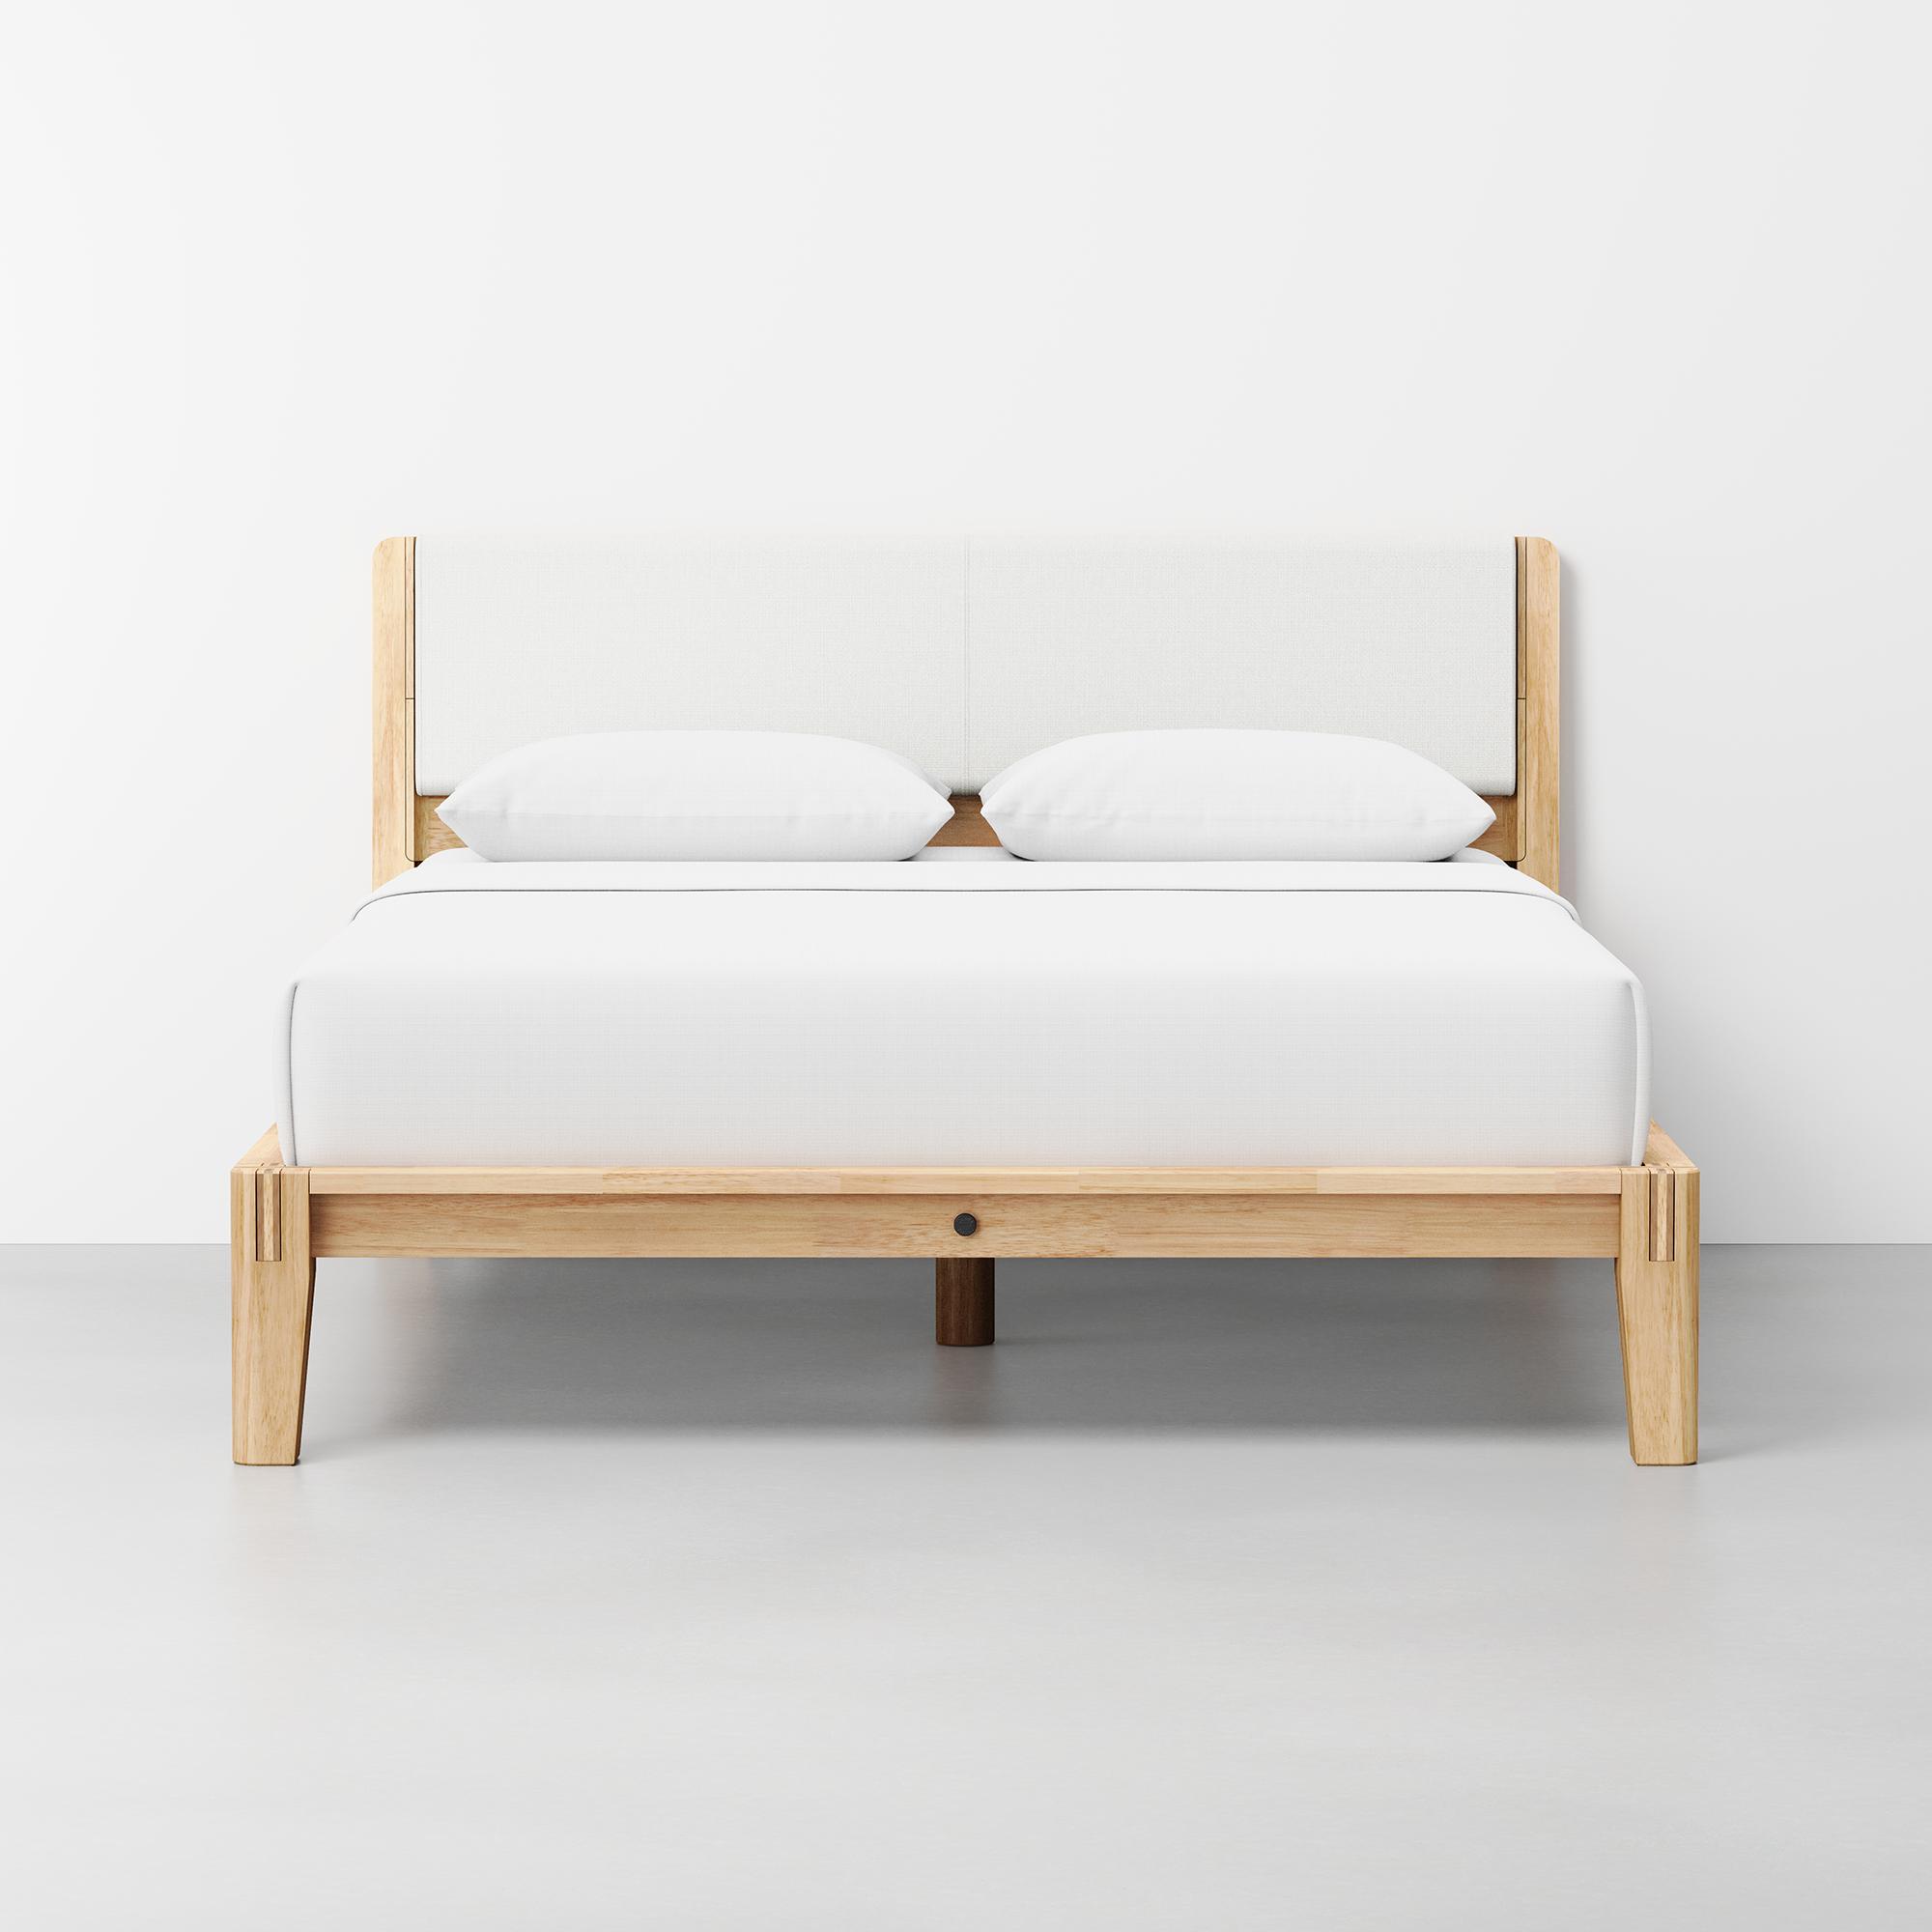 The Bed (Natural / HB Cushion Light Linen) - Render - Front